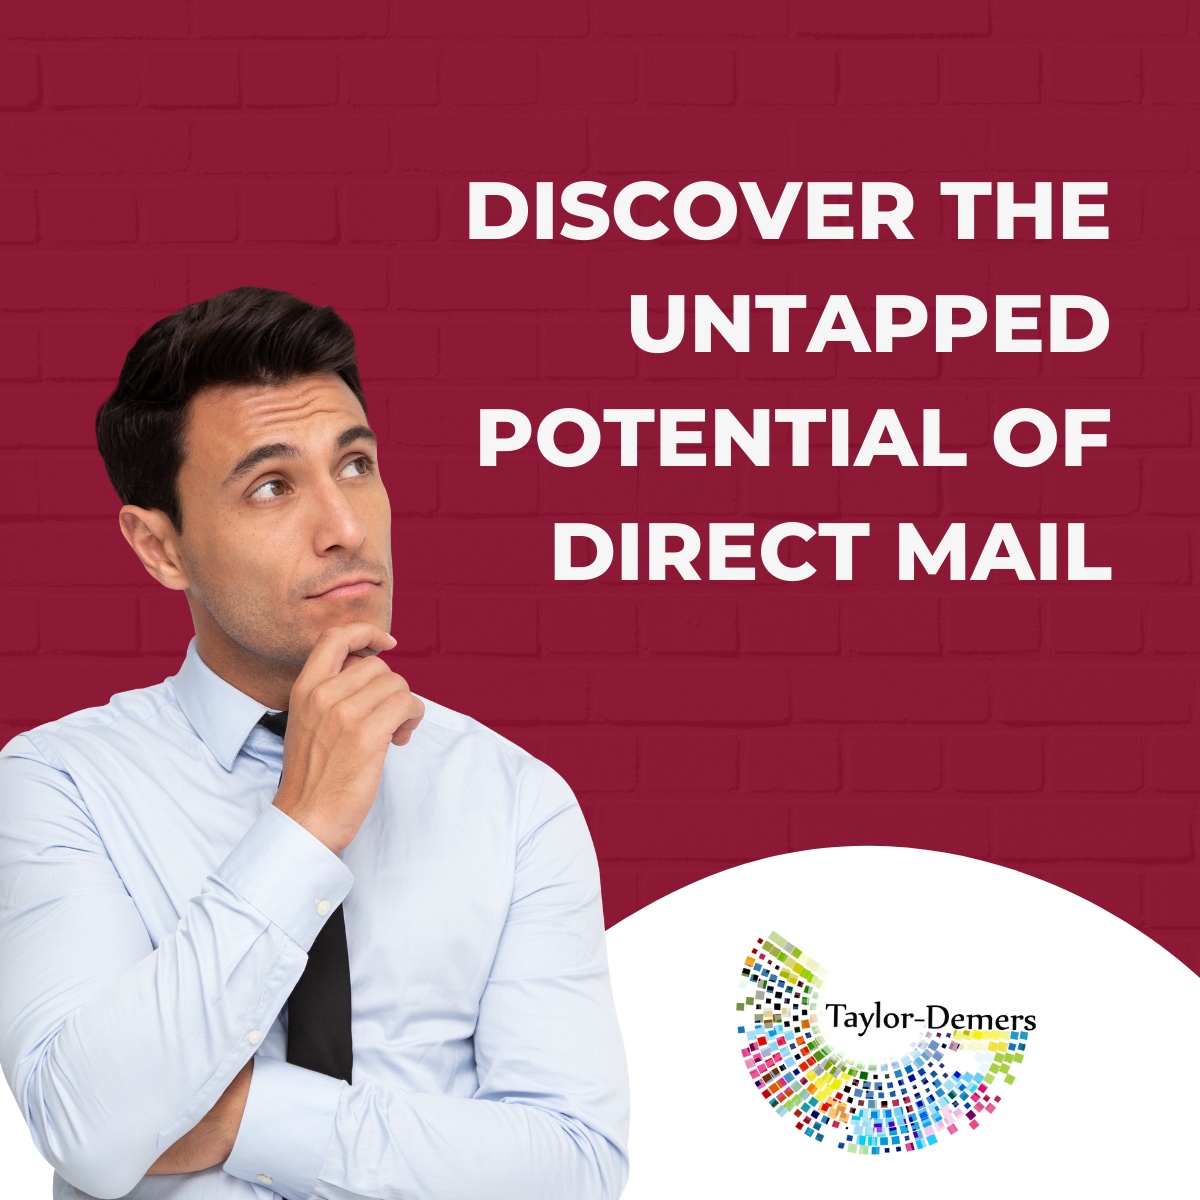 📣 Attention non-profit organizations! 📣
Discover the untapped potential of direct mail in boosting your fundraising efforts. Check out our latest blog: taylor-demers.com/blog

#NonProfitMarketing #DirectMail #FundraisingSuccess